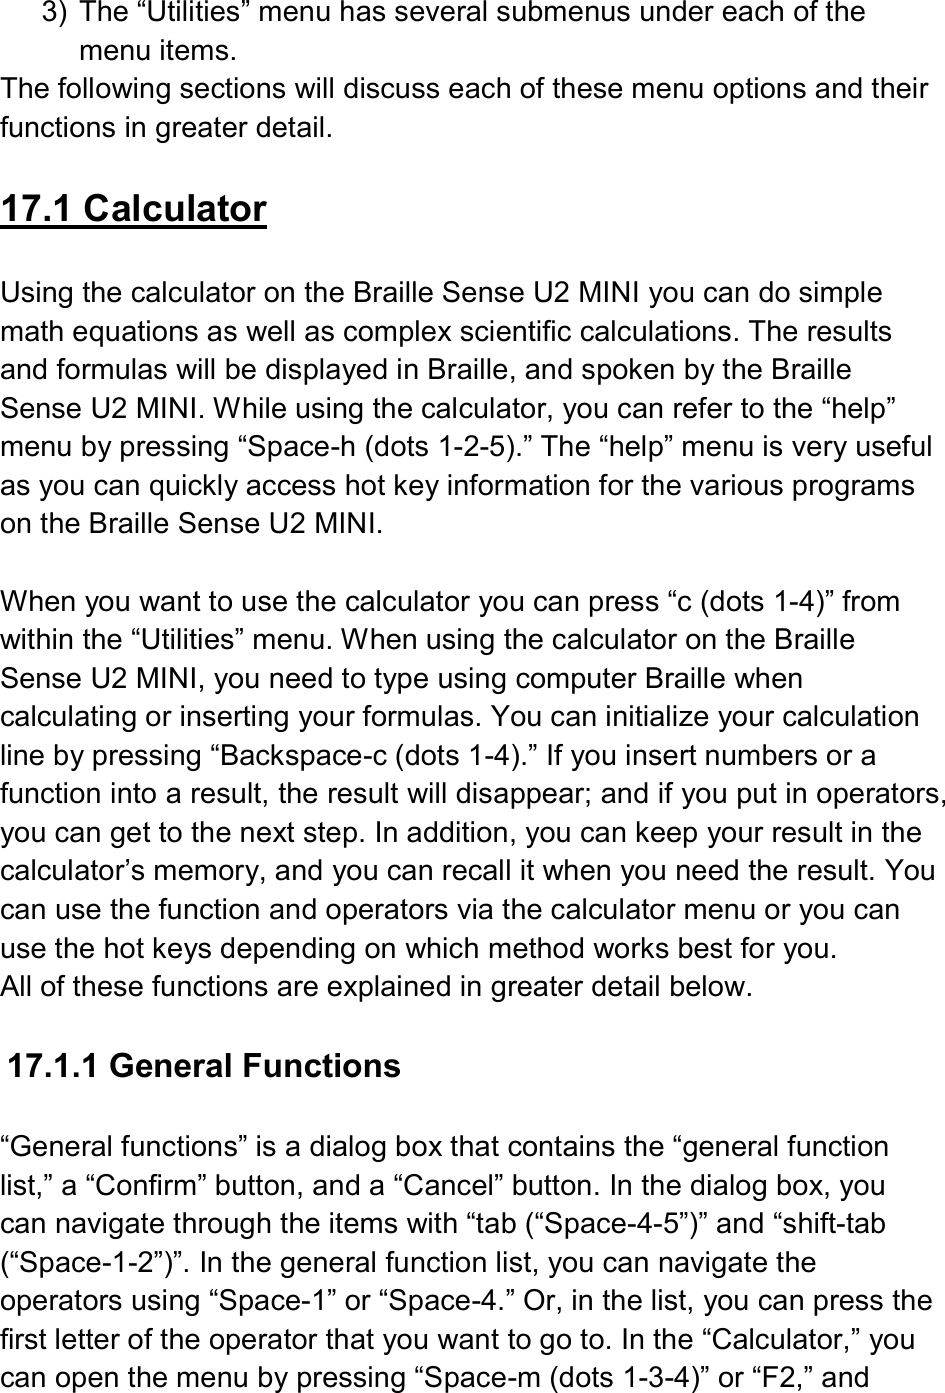  3)  The “Utilities” menu has several submenus under each of the menu items.   The following sections will discuss each of these menu options and their functions in greater detail.  17.1 Calculator  Using the calculator on the Braille Sense U2 MINI you can do simple math equations as well as complex scientific calculations. The results and formulas will be displayed in Braille, and spoken by the Braille Sense U2 MINI. While using the calculator, you can refer to the “help” menu by pressing “Space-h (dots 1-2-5).” The “help” menu is very useful as you can quickly access hot key information for the various programs on the Braille Sense U2 MINI.  When you want to use the calculator you can press “c (dots 1-4)” from within the “Utilities” menu. When using the calculator on the Braille Sense U2 MINI, you need to type using computer Braille when calculating or inserting your formulas. You can initialize your calculation line by pressing “Backspace-c (dots 1-4).” If you insert numbers or a function into a result, the result will disappear; and if you put in operators, you can get to the next step. In addition, you can keep your result in the calculator’s memory, and you can recall it when you need the result. You can use the function and operators via the calculator menu or you can use the hot keys depending on which method works best for you. All of these functions are explained in greater detail below.  17.1.1 General Functions  “General functions” is a dialog box that contains the “general function list,” a “Confirm” button, and a “Cancel” button. In the dialog box, you can navigate through the items with “tab (“Space-4-5”)” and “shift-tab (“Space-1-2”)”. In the general function list, you can navigate the operators using “Space-1” or “Space-4.” Or, in the list, you can press the first letter of the operator that you want to go to. In the “Calculator,” you can open the menu by pressing “Space-m (dots 1-3-4)” or “F2,” and 